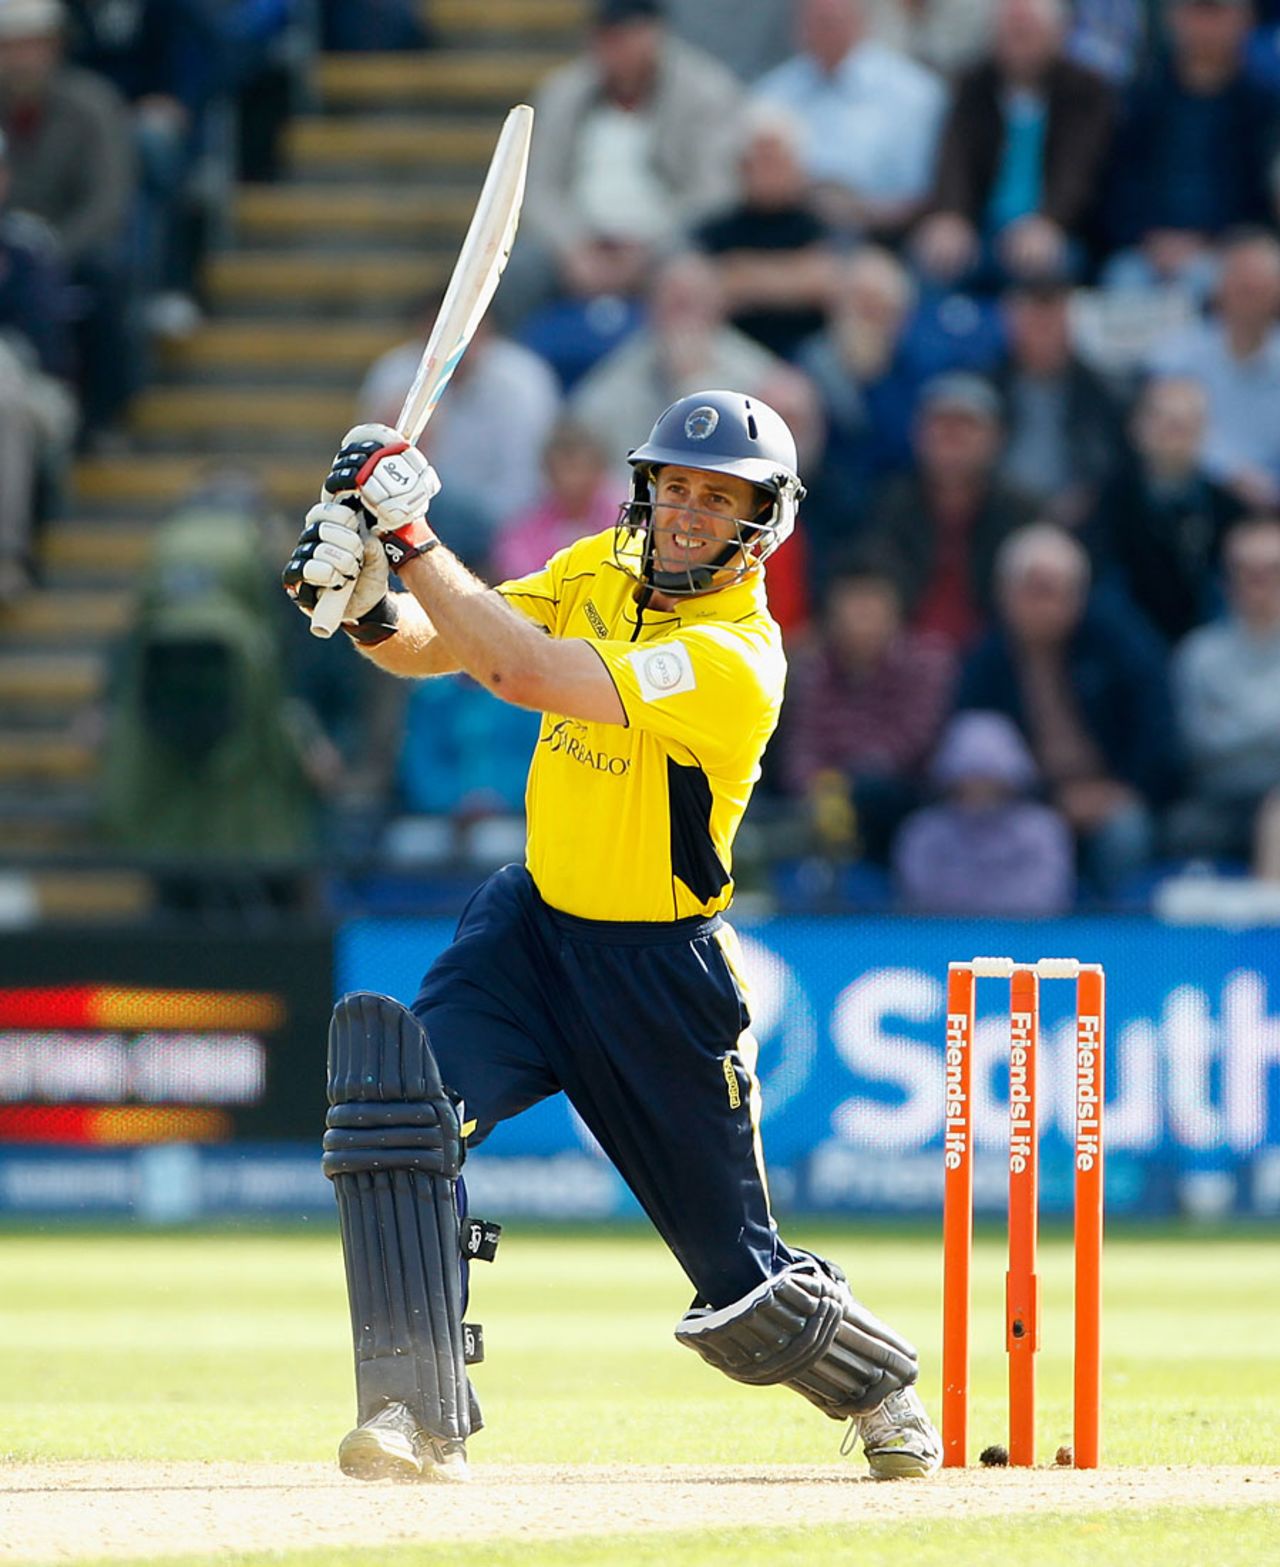 Simon Katich helped guide Hampshire's chase from a tricky point, Hampshire v Somerset, Friends Life t20 semi-final, Cardiff, August 25, 2012